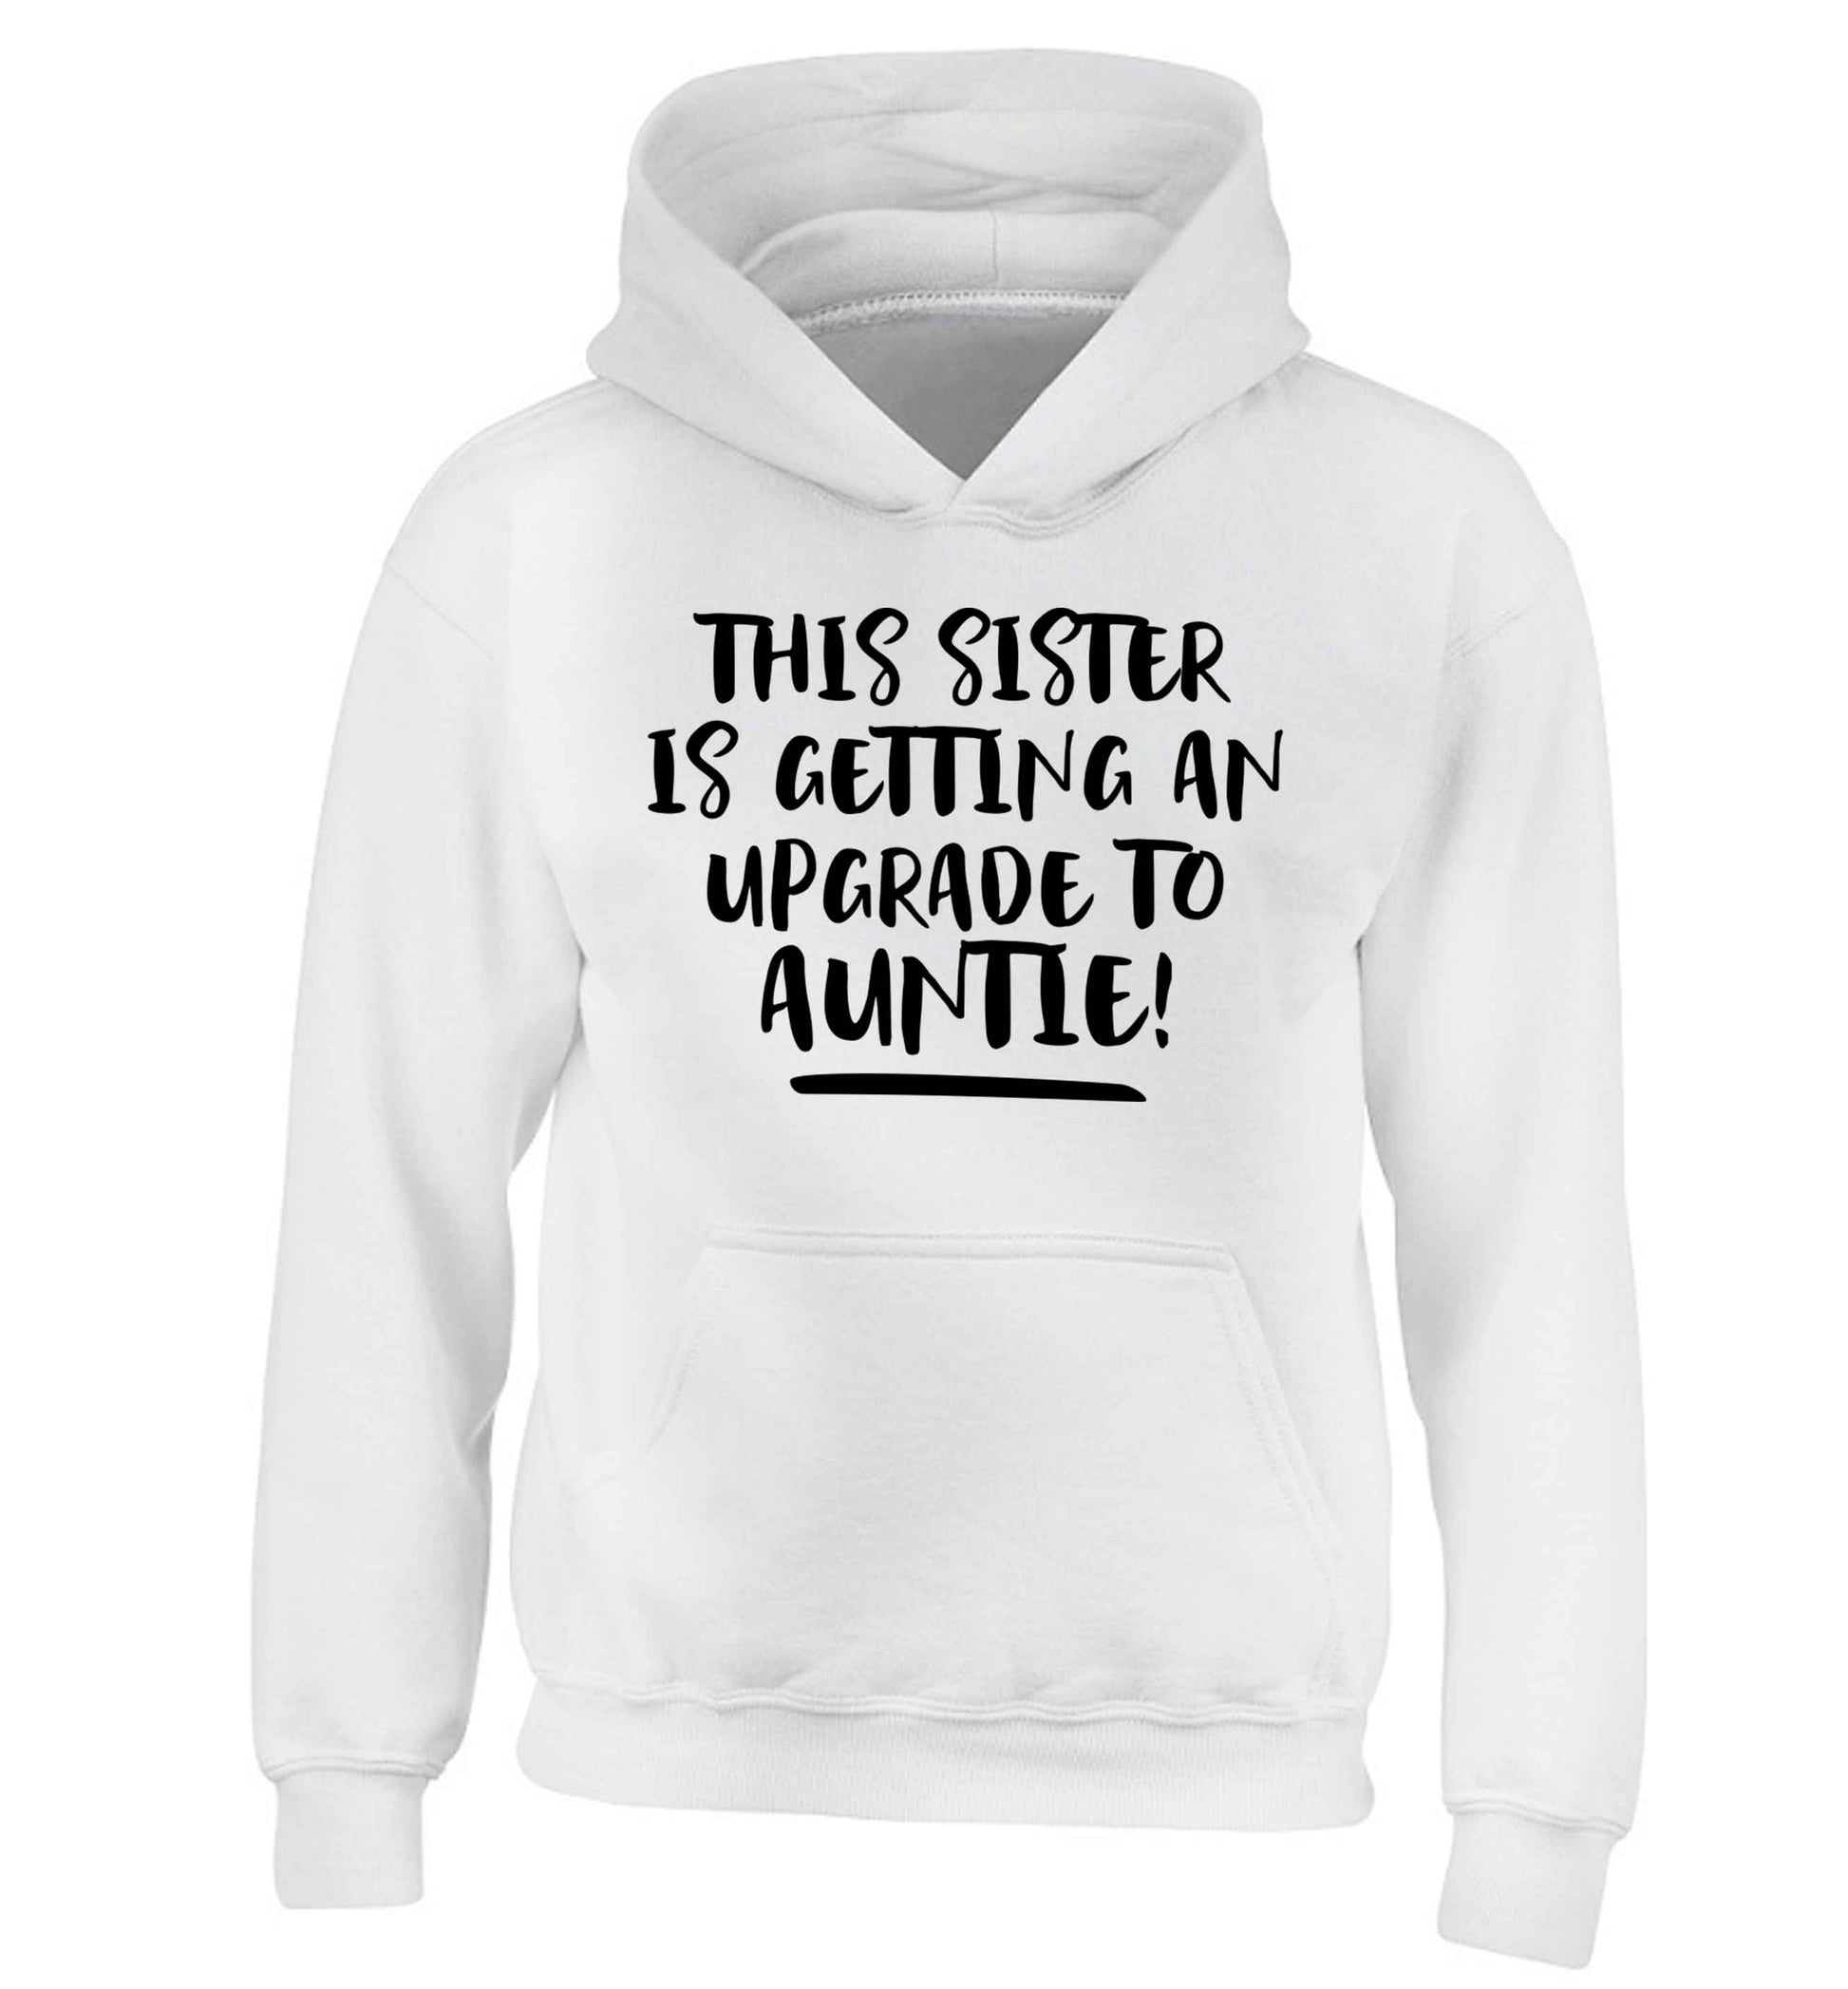 This sister is getting an upgrade to auntie! children's white hoodie 12-13 Years